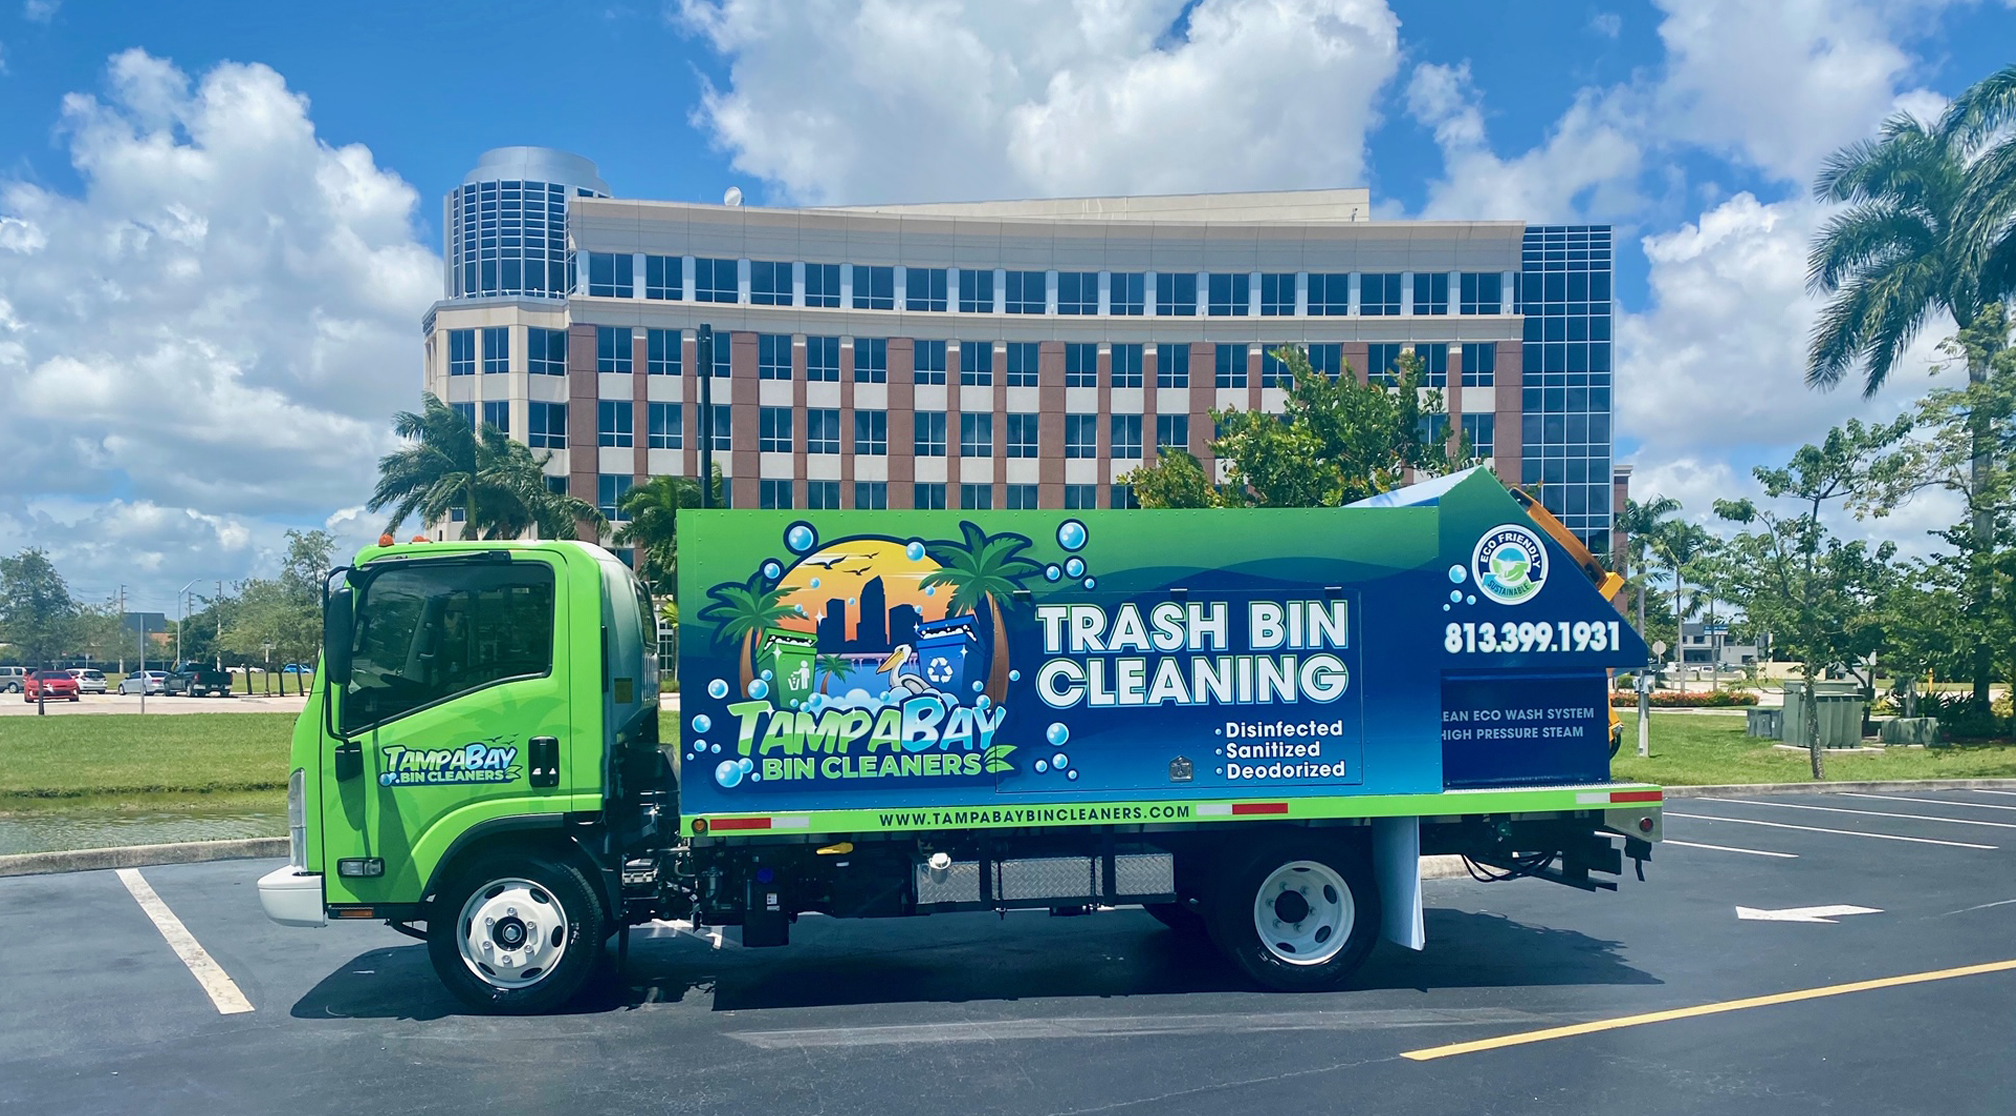 Trash Bin Cleaning Services